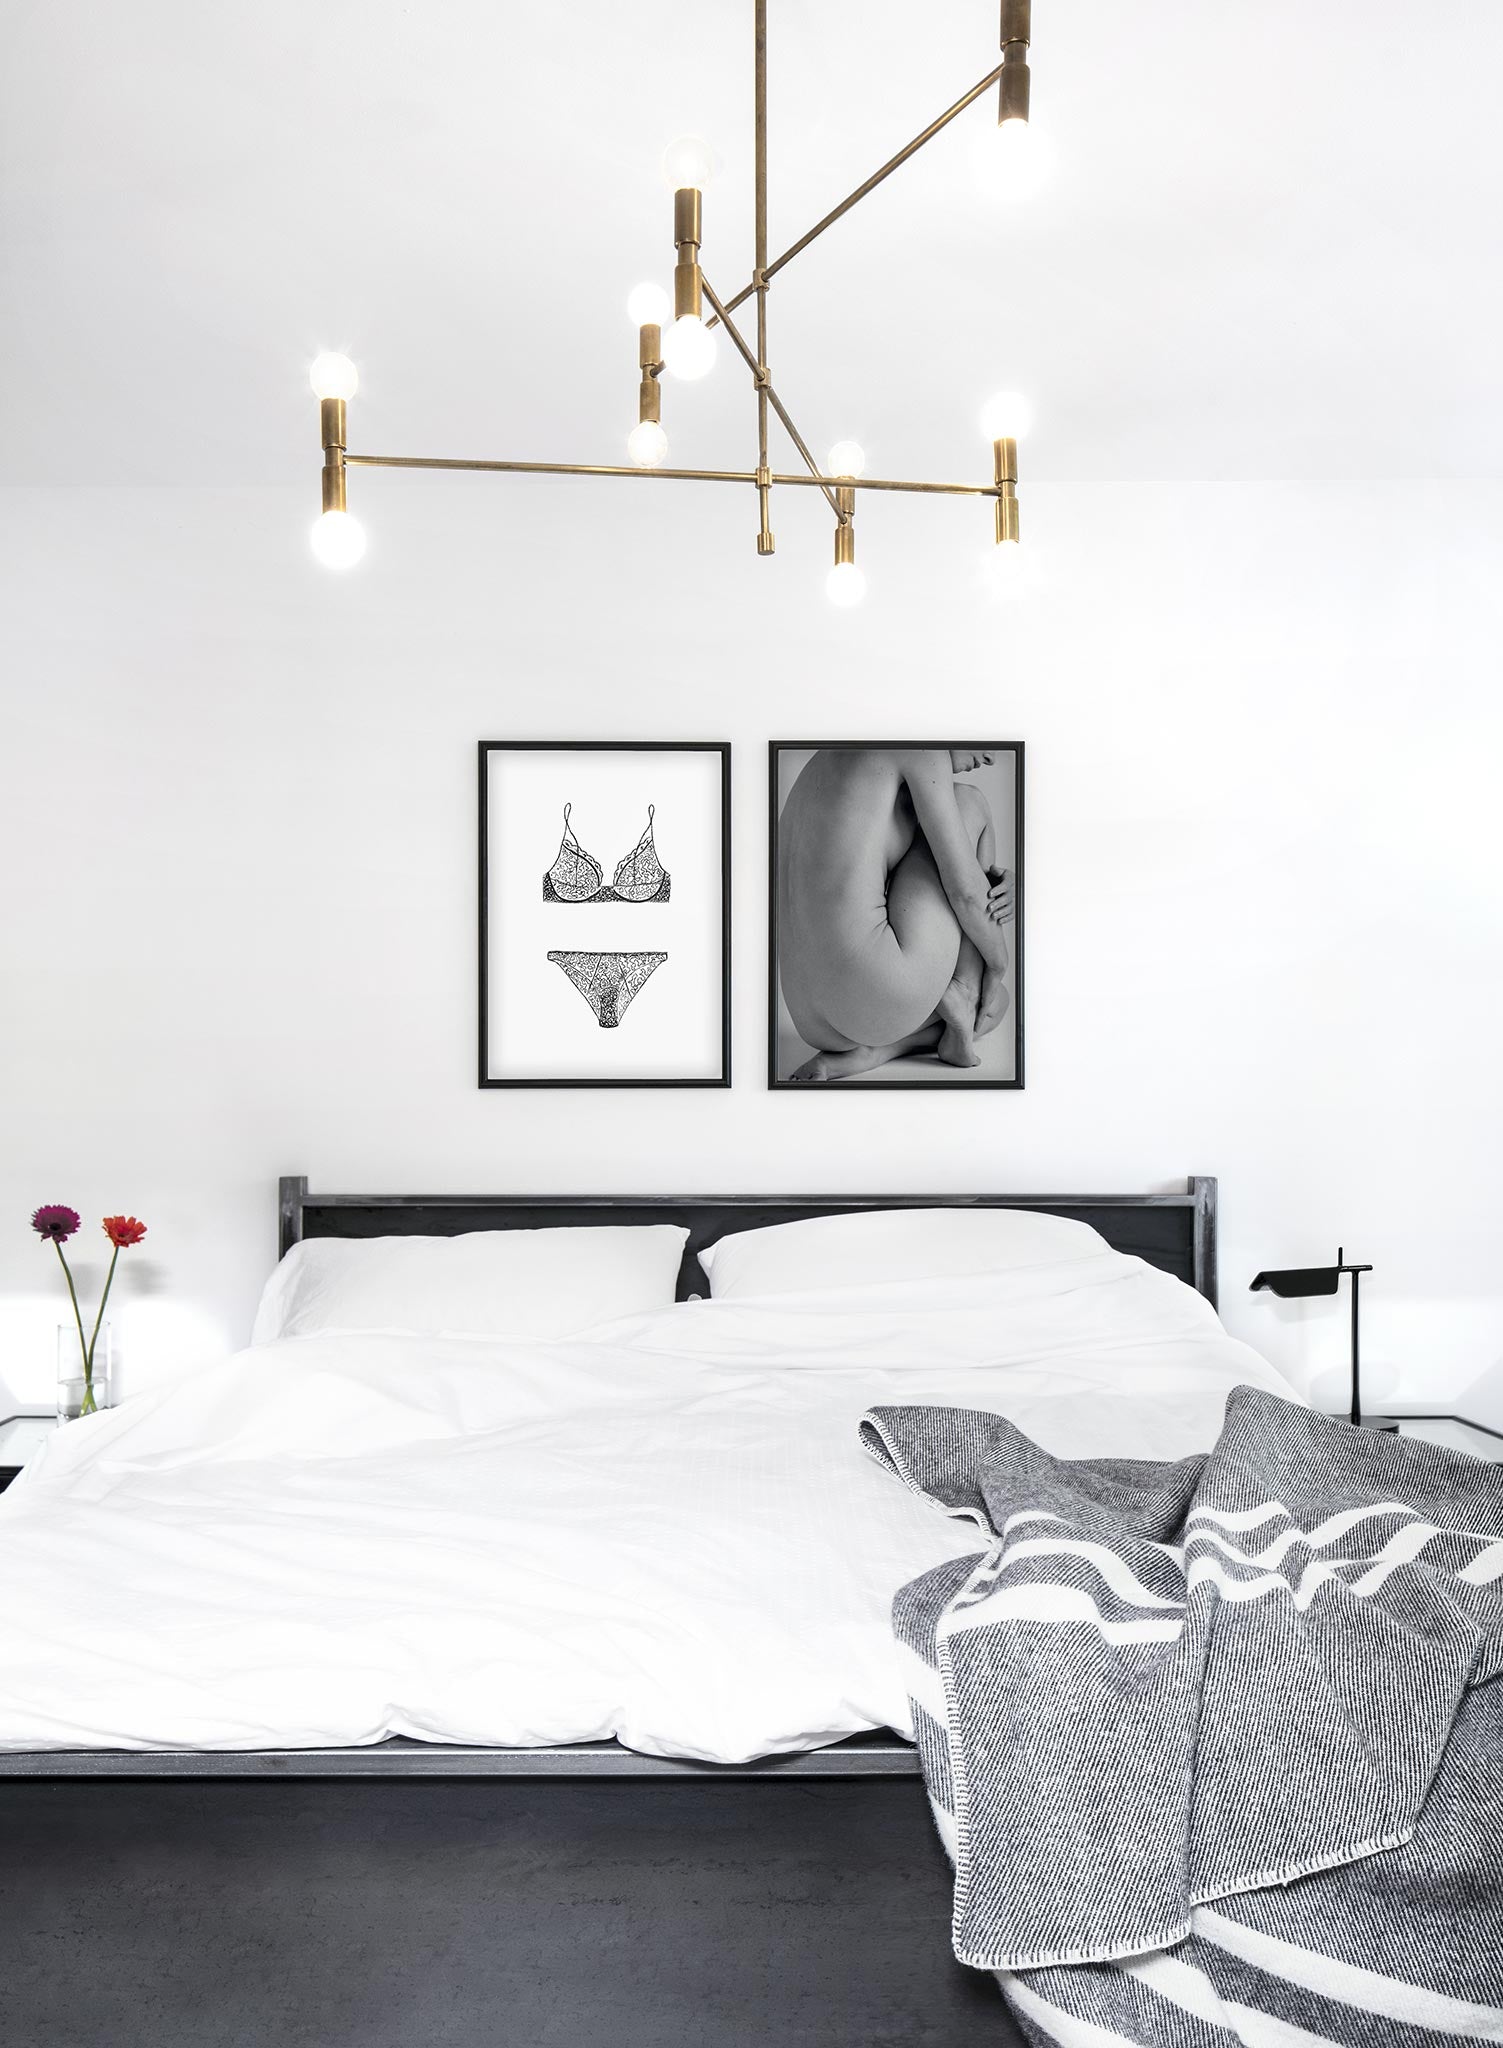 Black and white fashion photography poster by Opposite Wall with naked woman - Lifestyle Duo - Bedroom